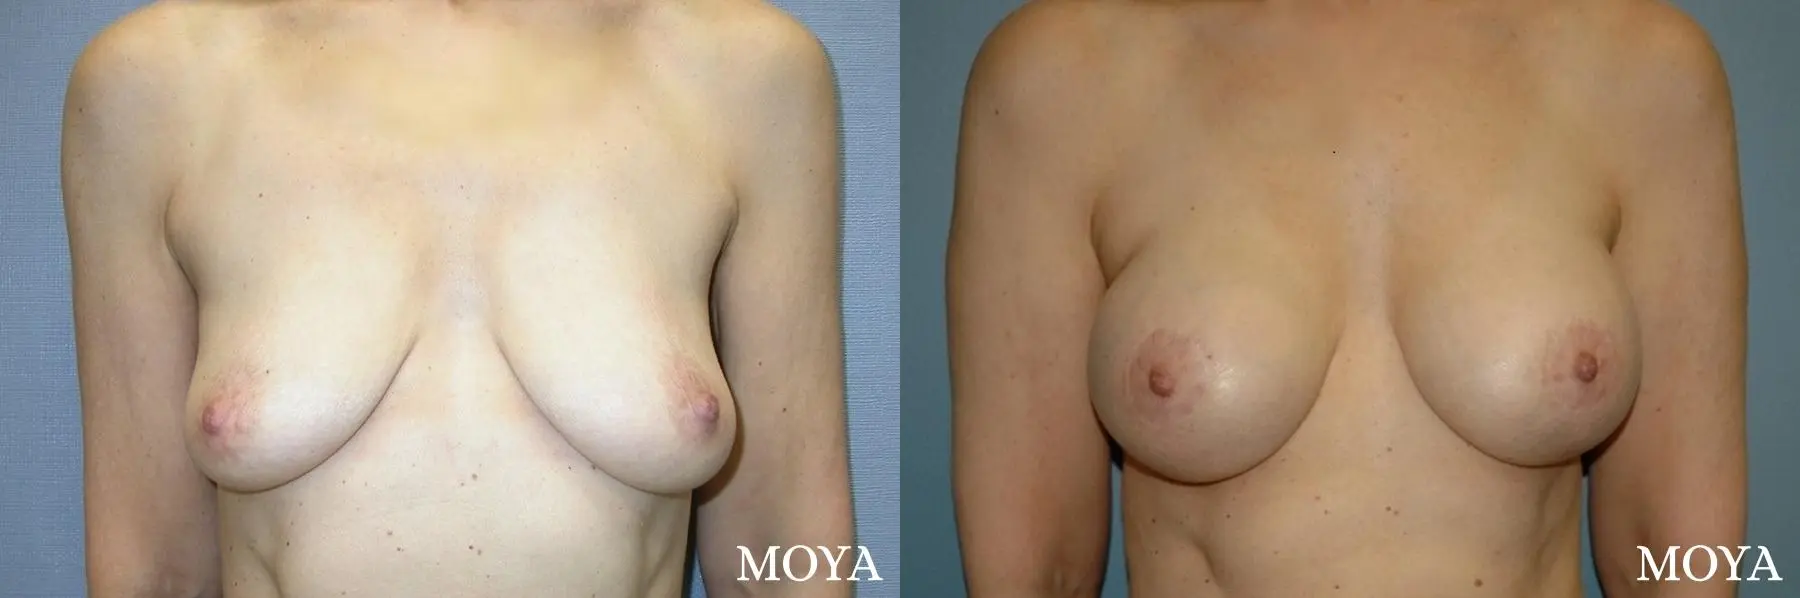 Breast Augmentation With Lift: Patient 3 - Before and After 1